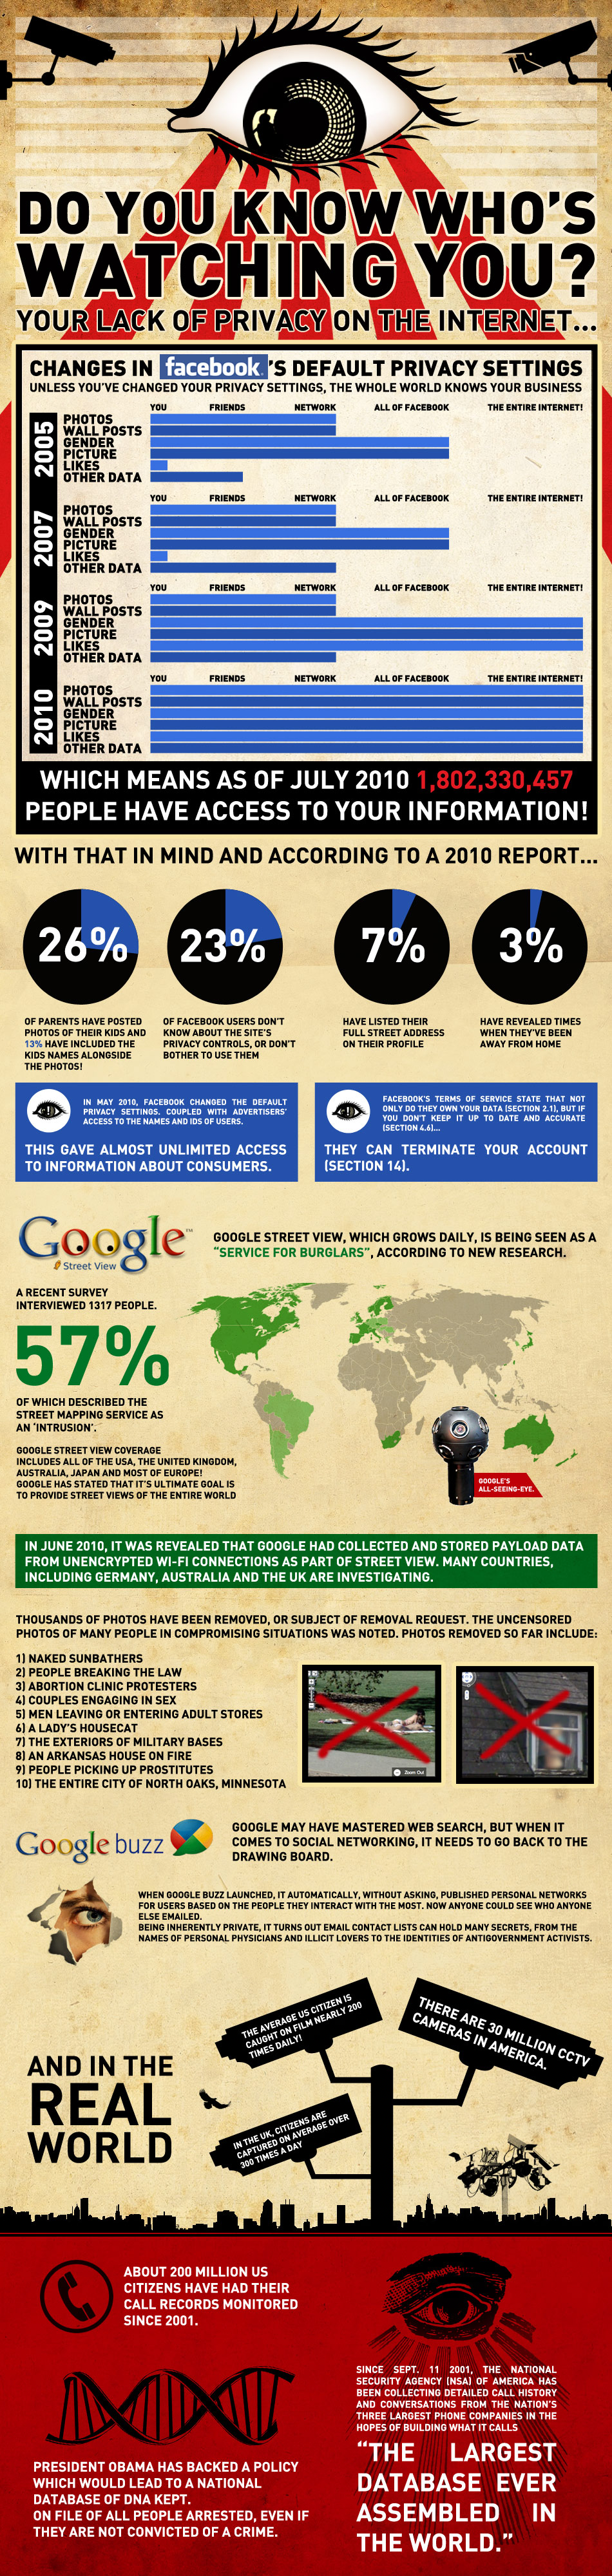 Google and Facebook Privacy Infographic